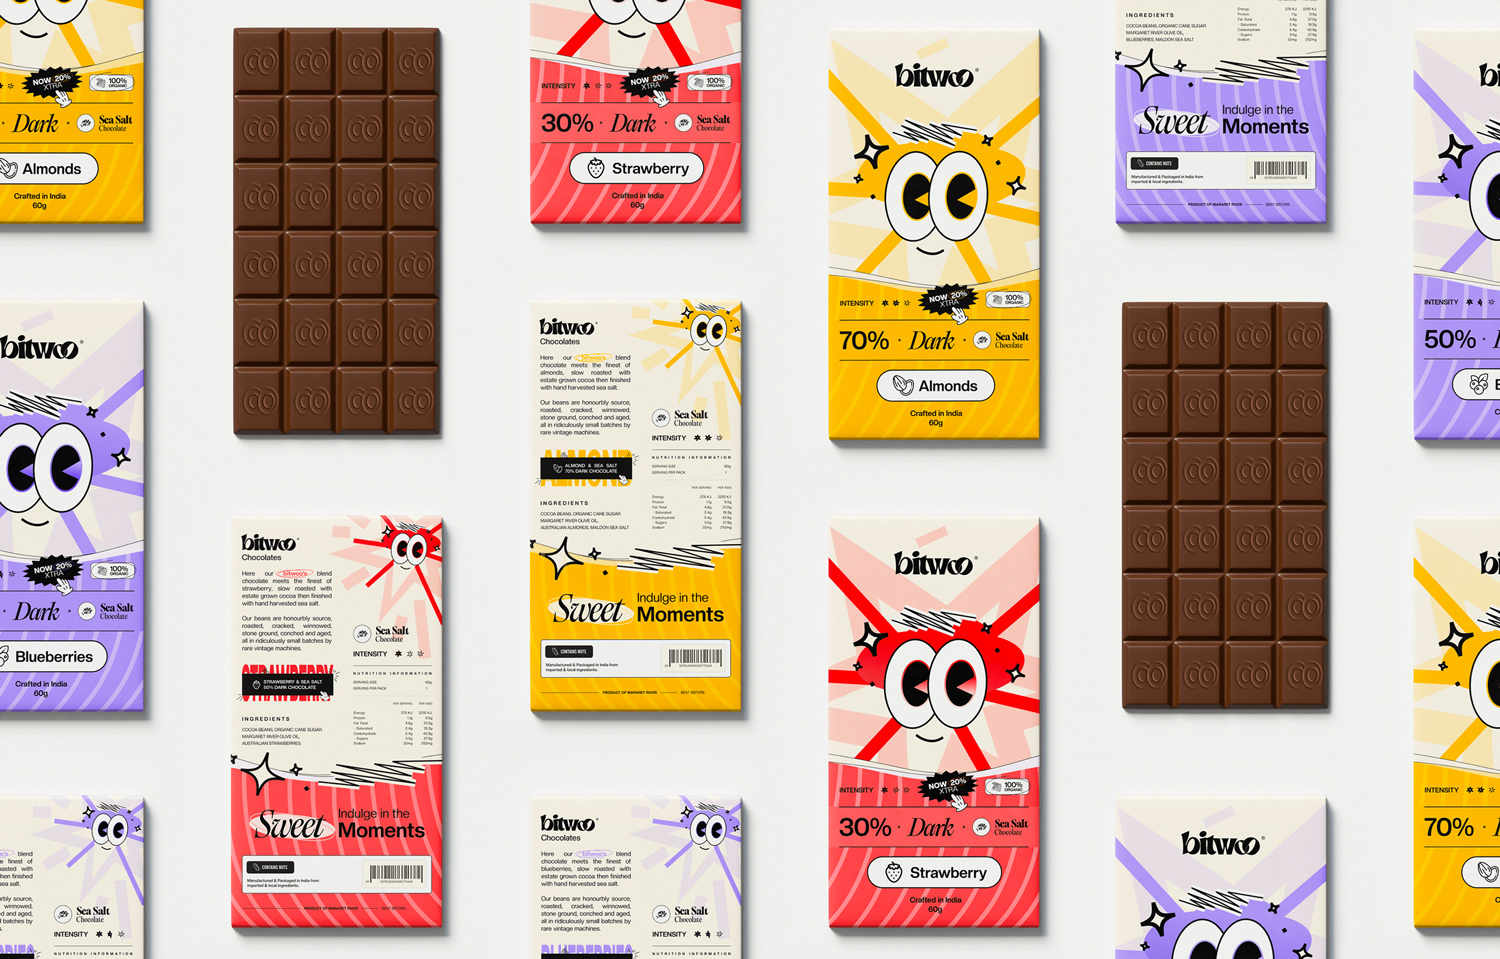 Creativecue Deliver Packaging Design for Bitwoo Dark Chocolate Aimed at Kids